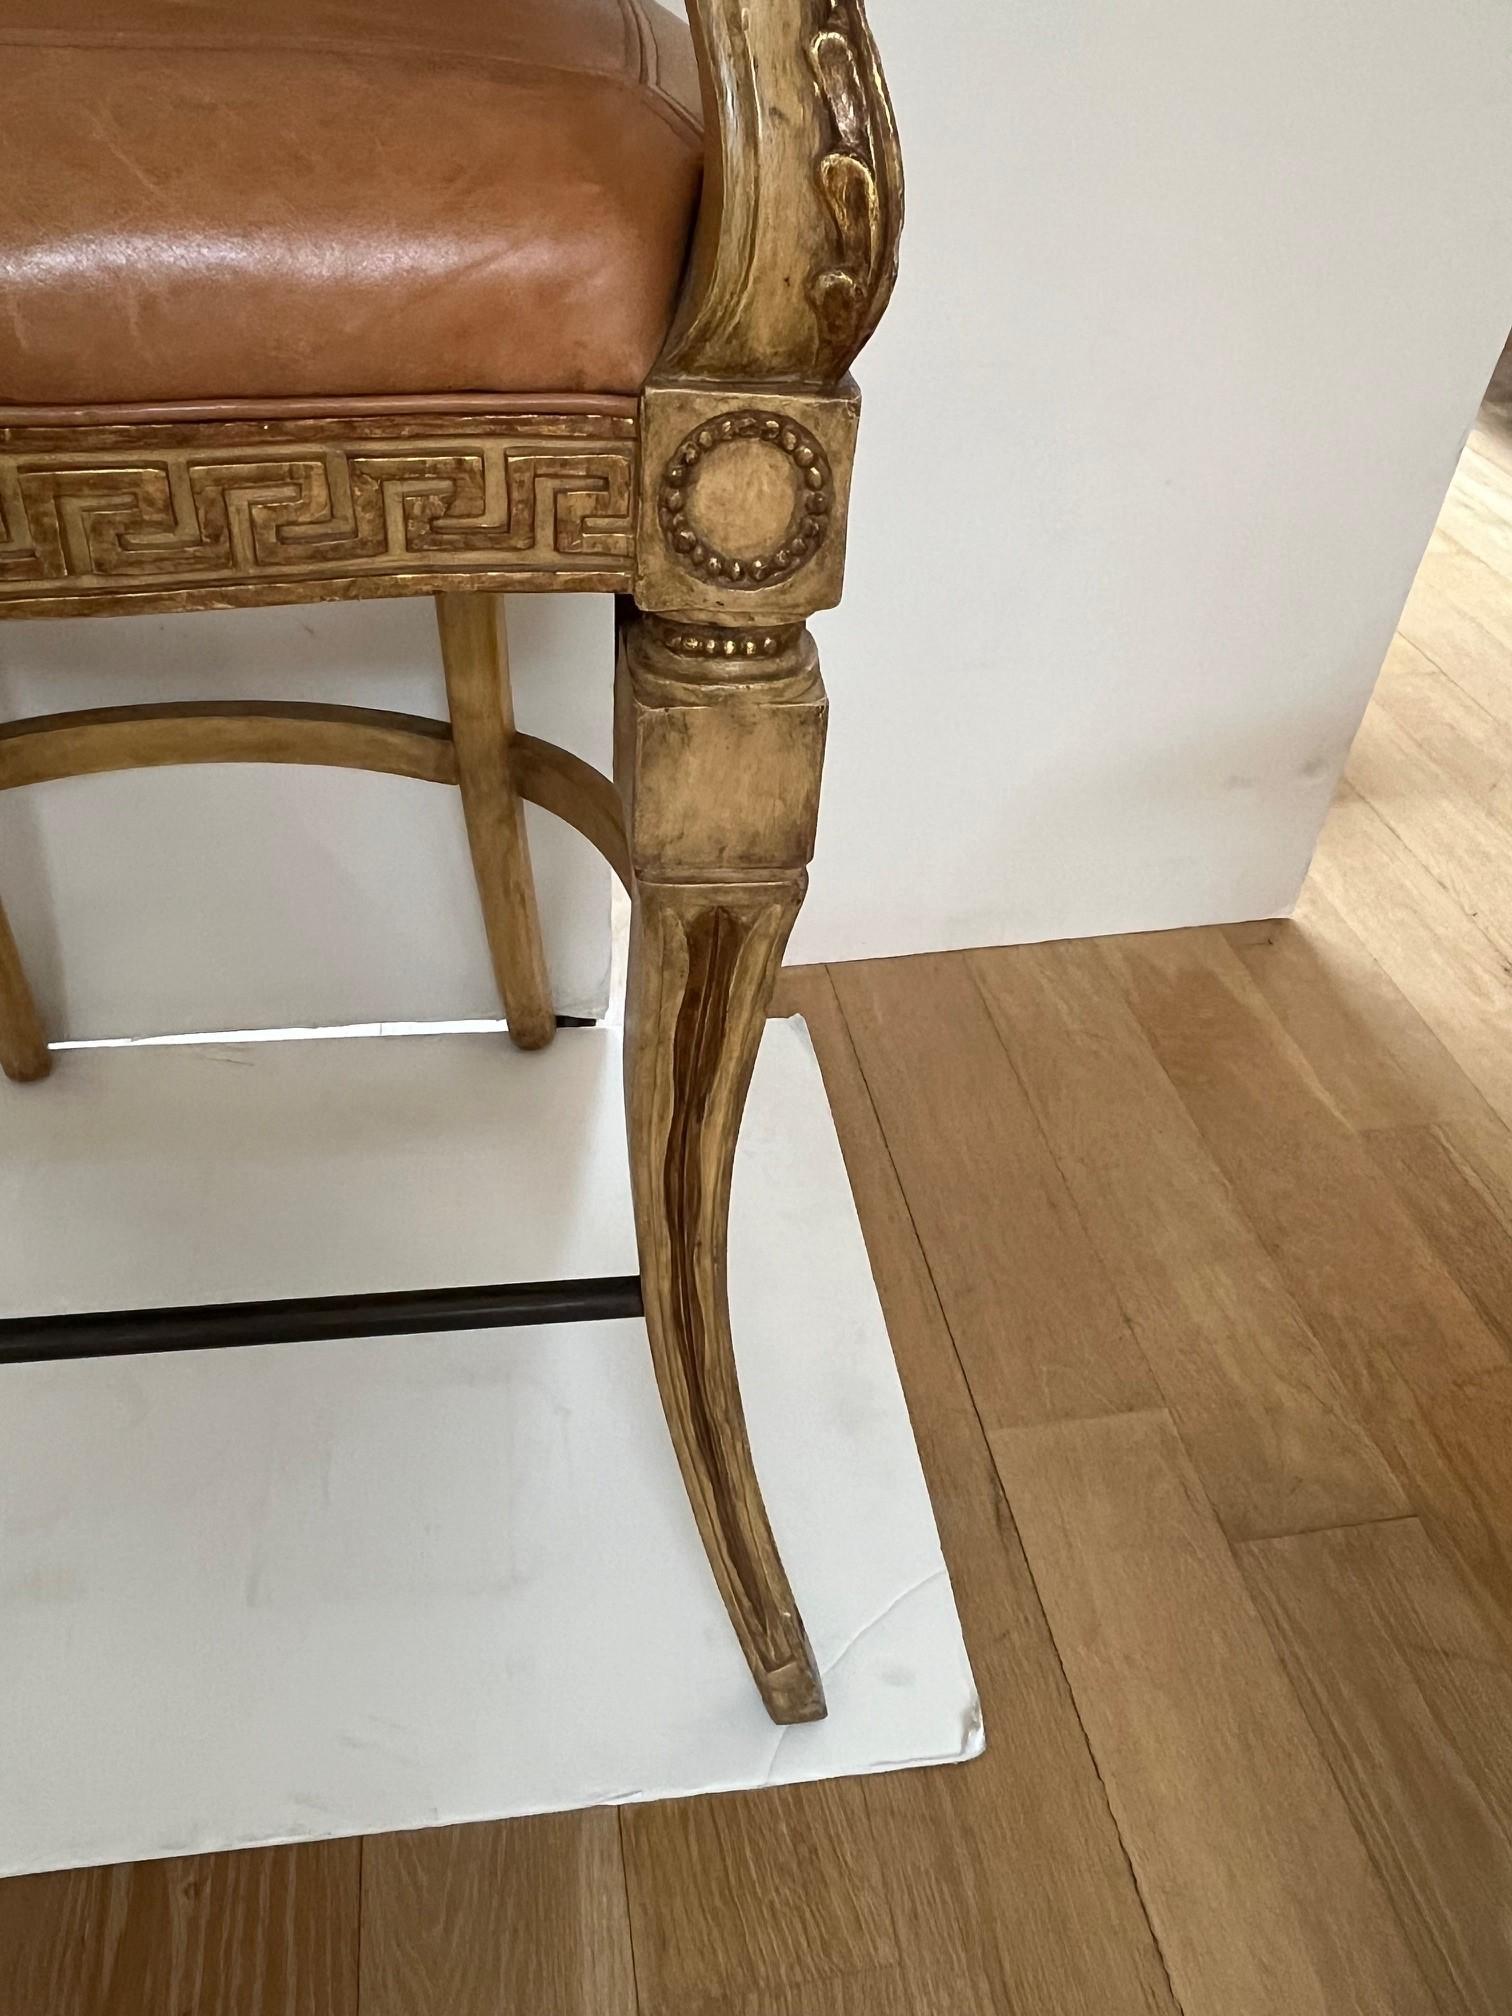 Made to Order Venetian Bar Stool in Antique Painted Finish with Gilded Detail For Sale 3